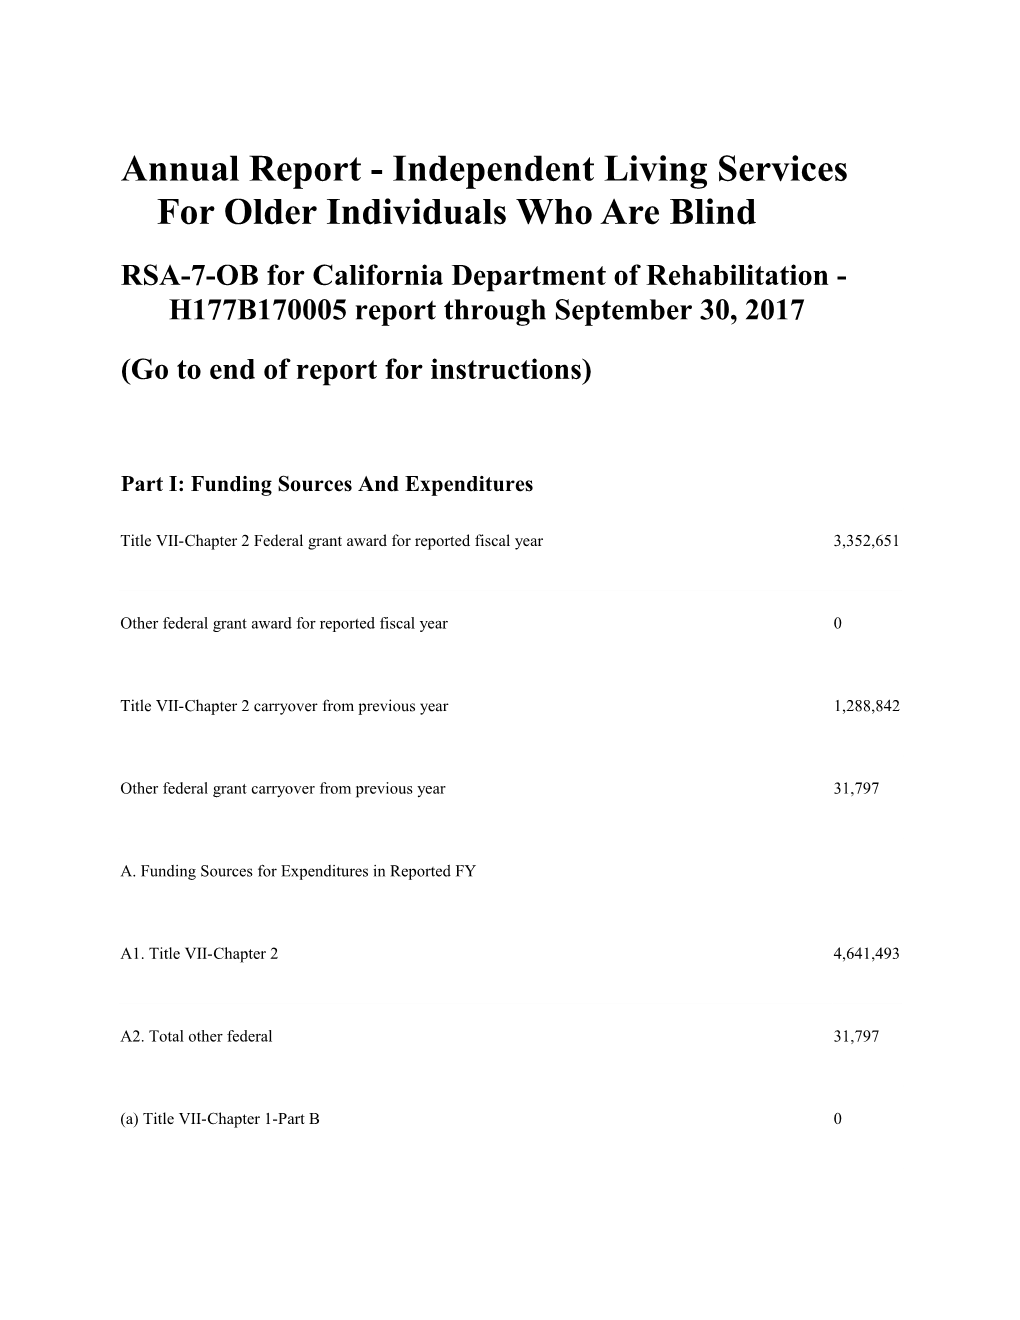 Annual Report - Independent Living Services for Older Individuals Who Are Blind s1